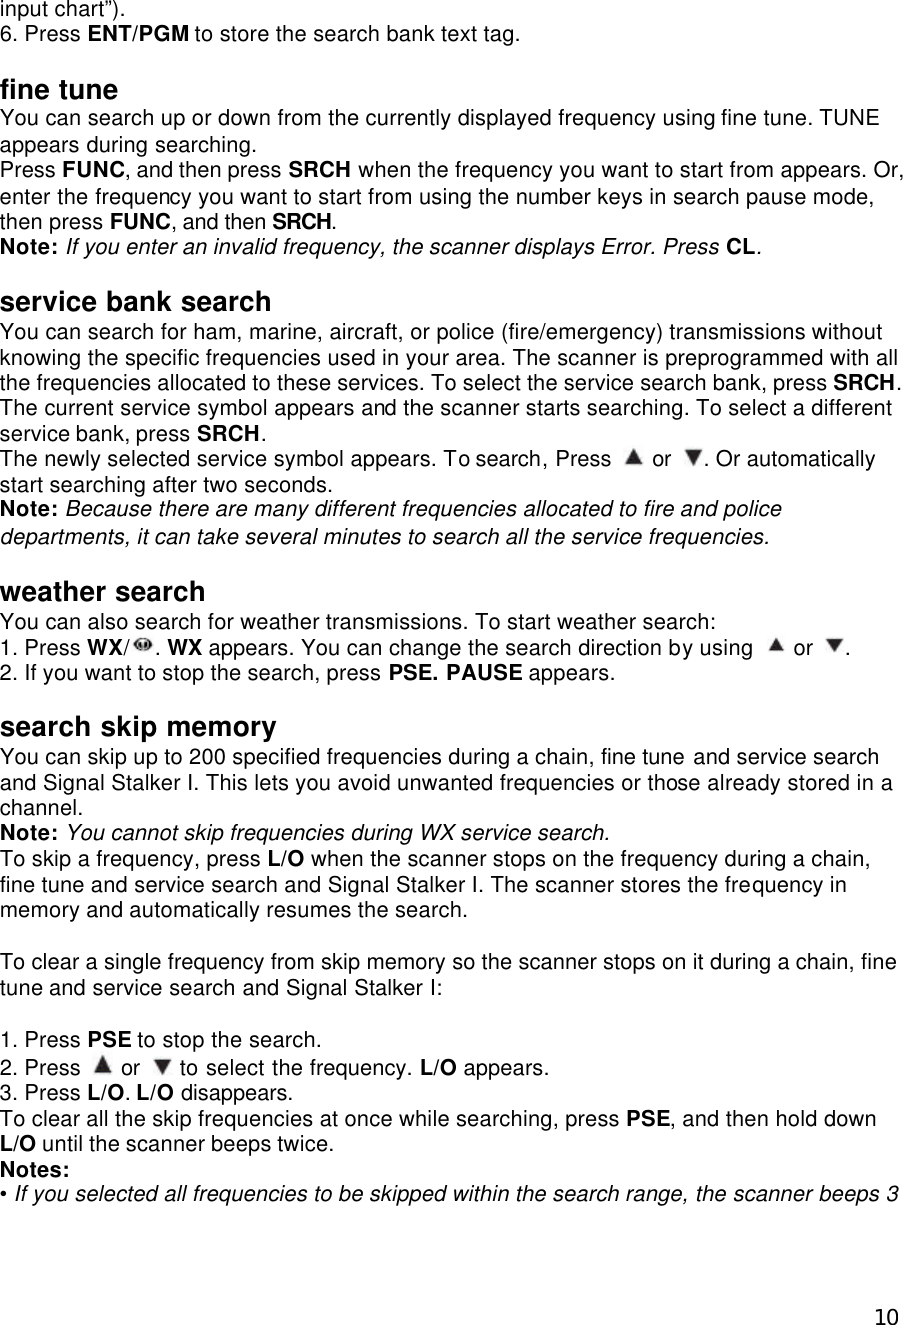  10input chart”). 6. Press ENT/PGM to store the search bank text tag.  fine tune You can search up or down from the currently displayed frequency using fine tune. TUNE appears during searching. Press FUNC, and then press SRCH when the frequency you want to start from appears. Or, enter the frequency you want to start from using the number keys in search pause mode, then press FUNC, and then SRCH. Note: If you enter an invalid frequency, the scanner displays Error. Press CL.  service bank search You can search for ham, marine, aircraft, or police (fire/emergency) transmissions without knowing the specific frequencies used in your area. The scanner is preprogrammed with all the frequencies allocated to these services. To select the service search bank, press SRCH. The current service symbol appears and the scanner starts searching. To select a different service bank, press SRCH. The newly selected service symbol appears. To search, Press   or  . Or automatically start searching after two seconds. Note: Because there are many different frequencies allocated to fire and police departments, it can take several minutes to search all the service frequencies.  weather search You can also search for weather transmissions. To start weather search: 1. Press WX/ . WX appears. You can change the search direction by using   or  . 2. If you want to stop the search, press PSE. PAUSE appears.  search skip memory You can skip up to 200 specified frequencies during a chain, fine tune and service search and Signal Stalker I. This lets you avoid unwanted frequencies or those already stored in a channel. Note: You cannot skip frequencies during WX service search. To skip a frequency, press L/O when the scanner stops on the frequency during a chain, fine tune and service search and Signal Stalker I. The scanner stores the frequency in memory and automatically resumes the search.  To clear a single frequency from skip memory so the scanner stops on it during a chain, fine tune and service search and Signal Stalker I:  1. Press PSE to stop the search. 2. Press   or   to select the frequency. L/O appears. 3. Press L/O. L/O disappears. To clear all the skip frequencies at once while searching, press PSE, and then hold down L/O until the scanner beeps twice. Notes: • If you selected all frequencies to be skipped within the search range, the scanner beeps 3 